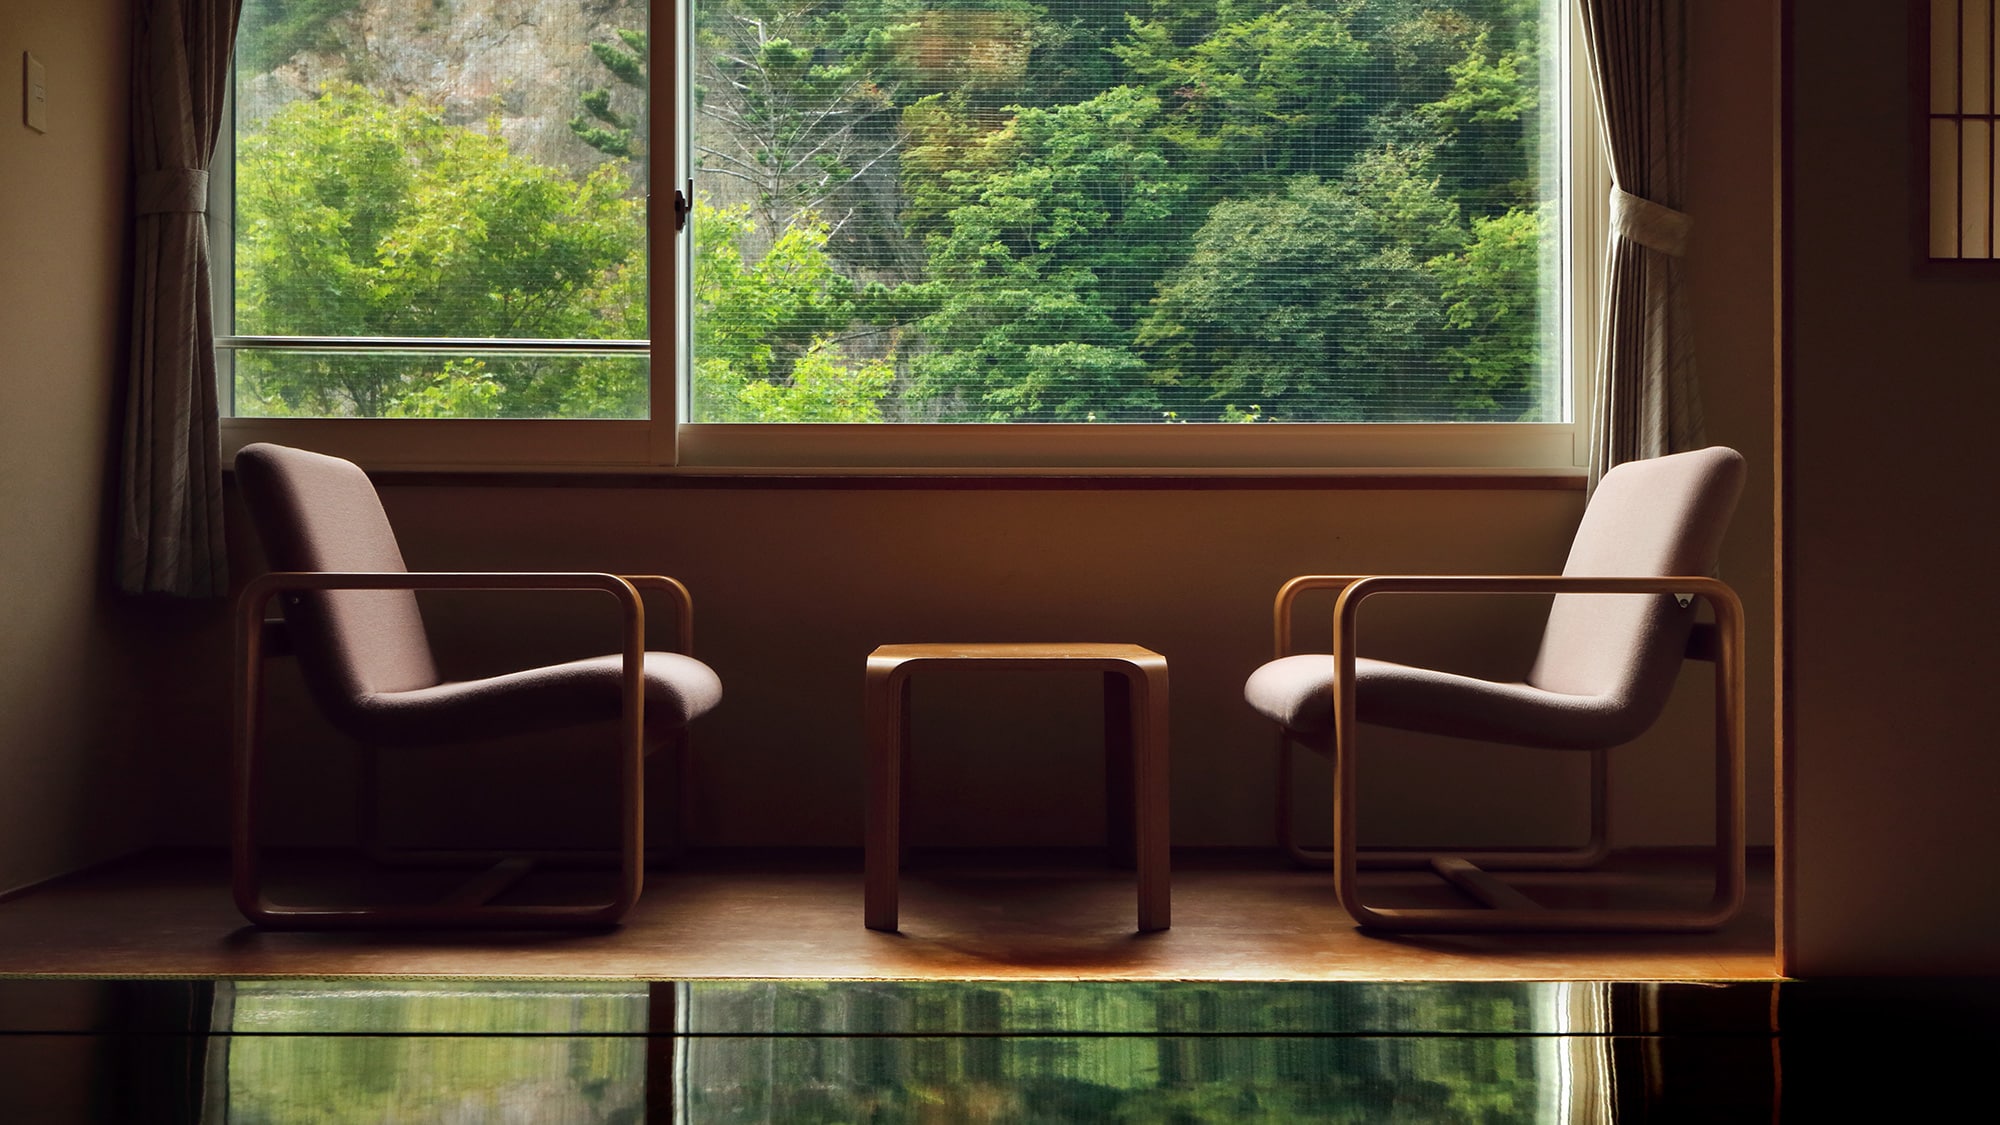 [Japanese-style room] Beyond the window, you can see the magnificent nature that is typical of Sounkyo.